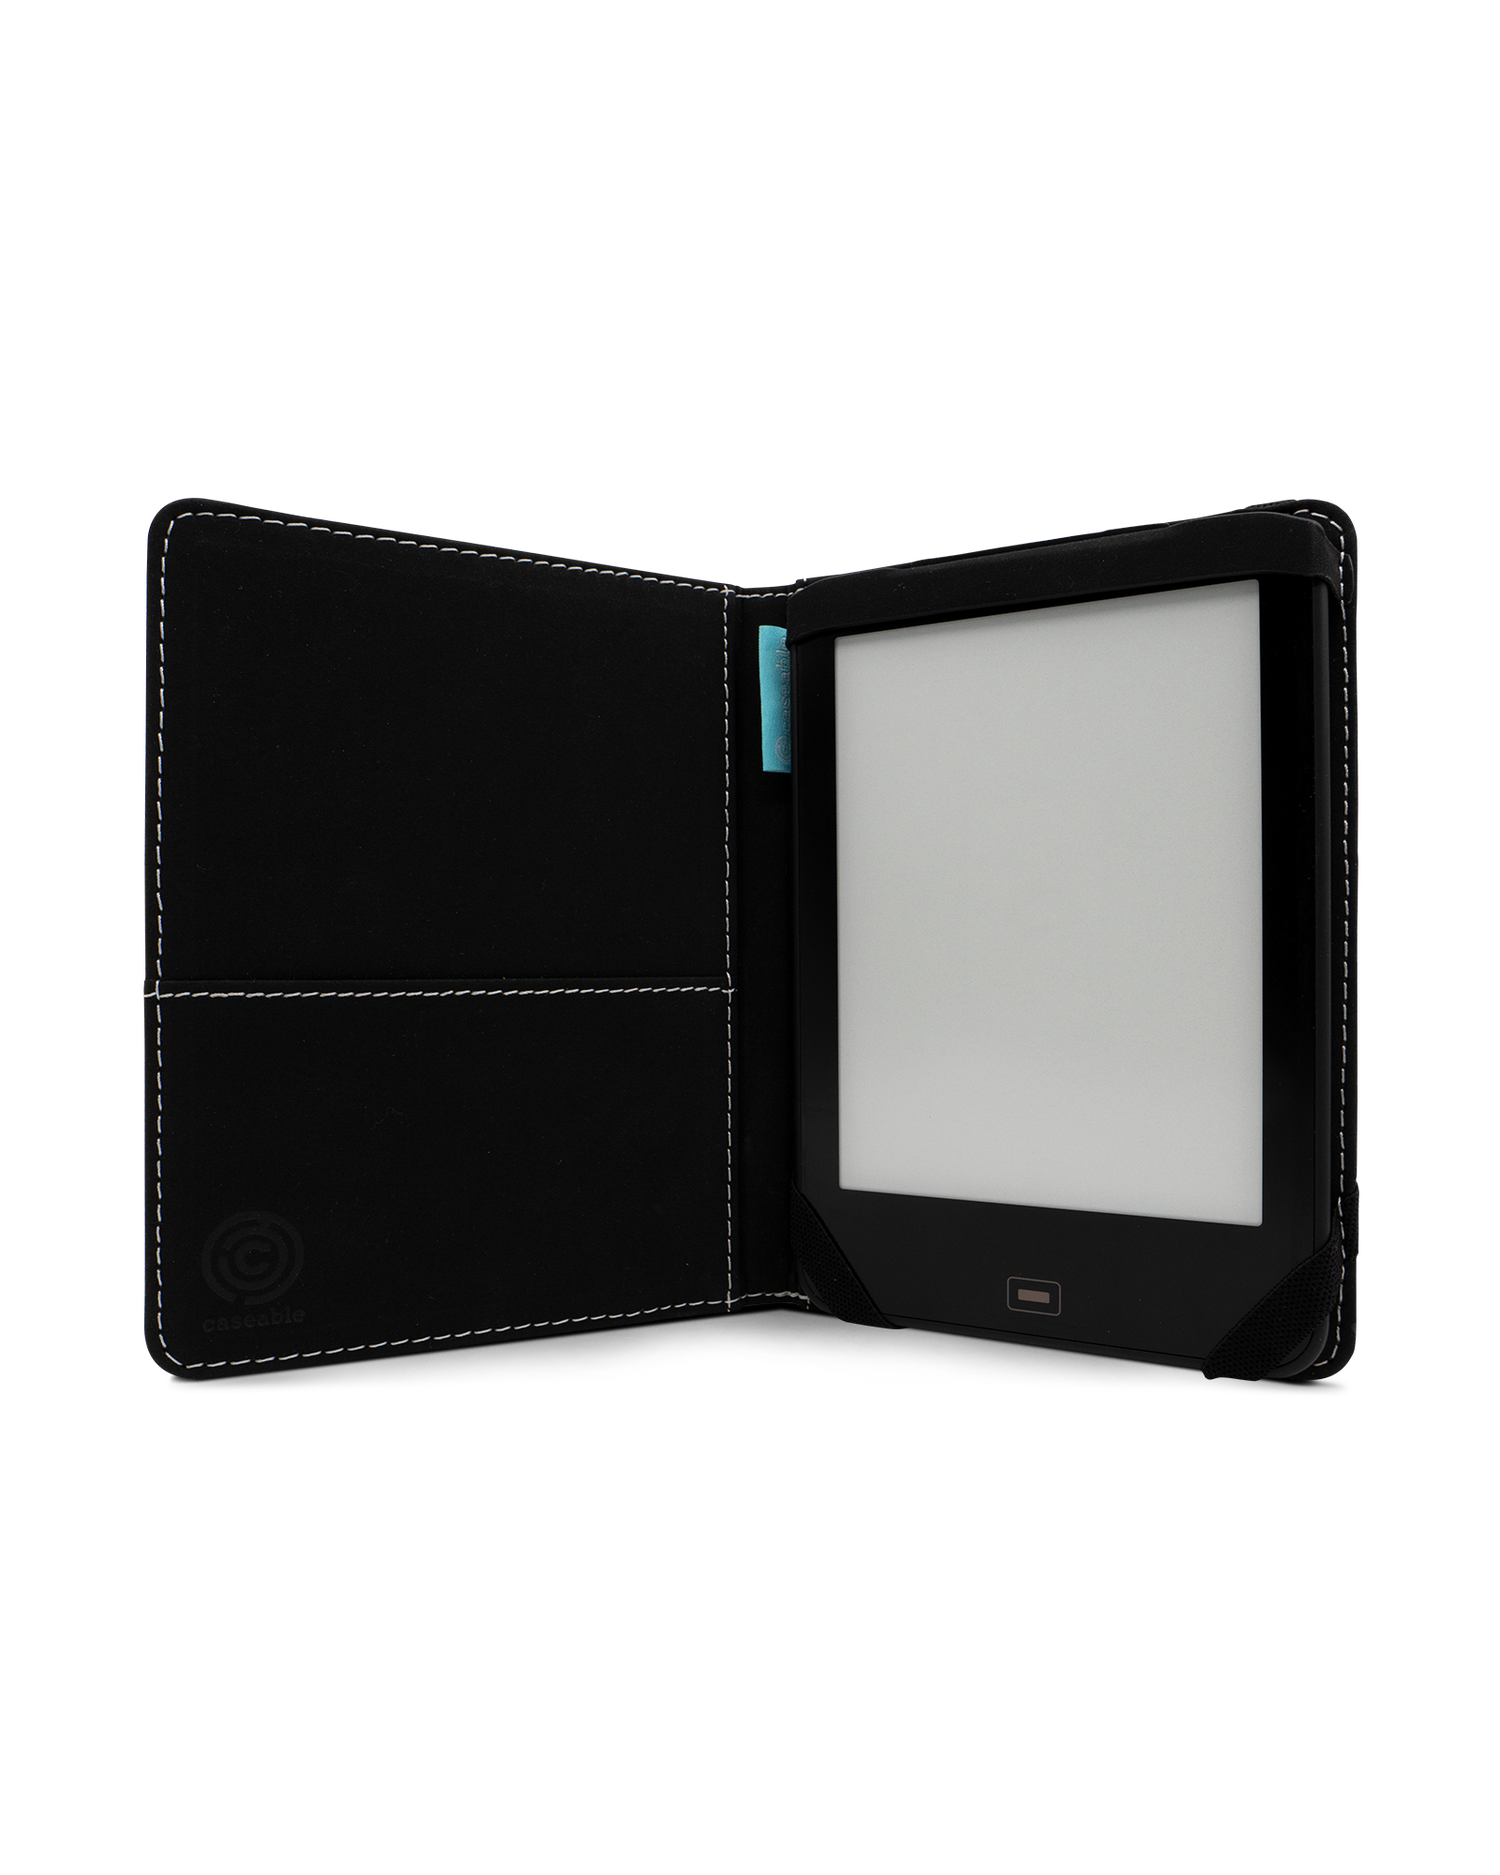 CLASSIC BLUE eReader Case for tolino vision 1 to 4 HD: Opened interior view